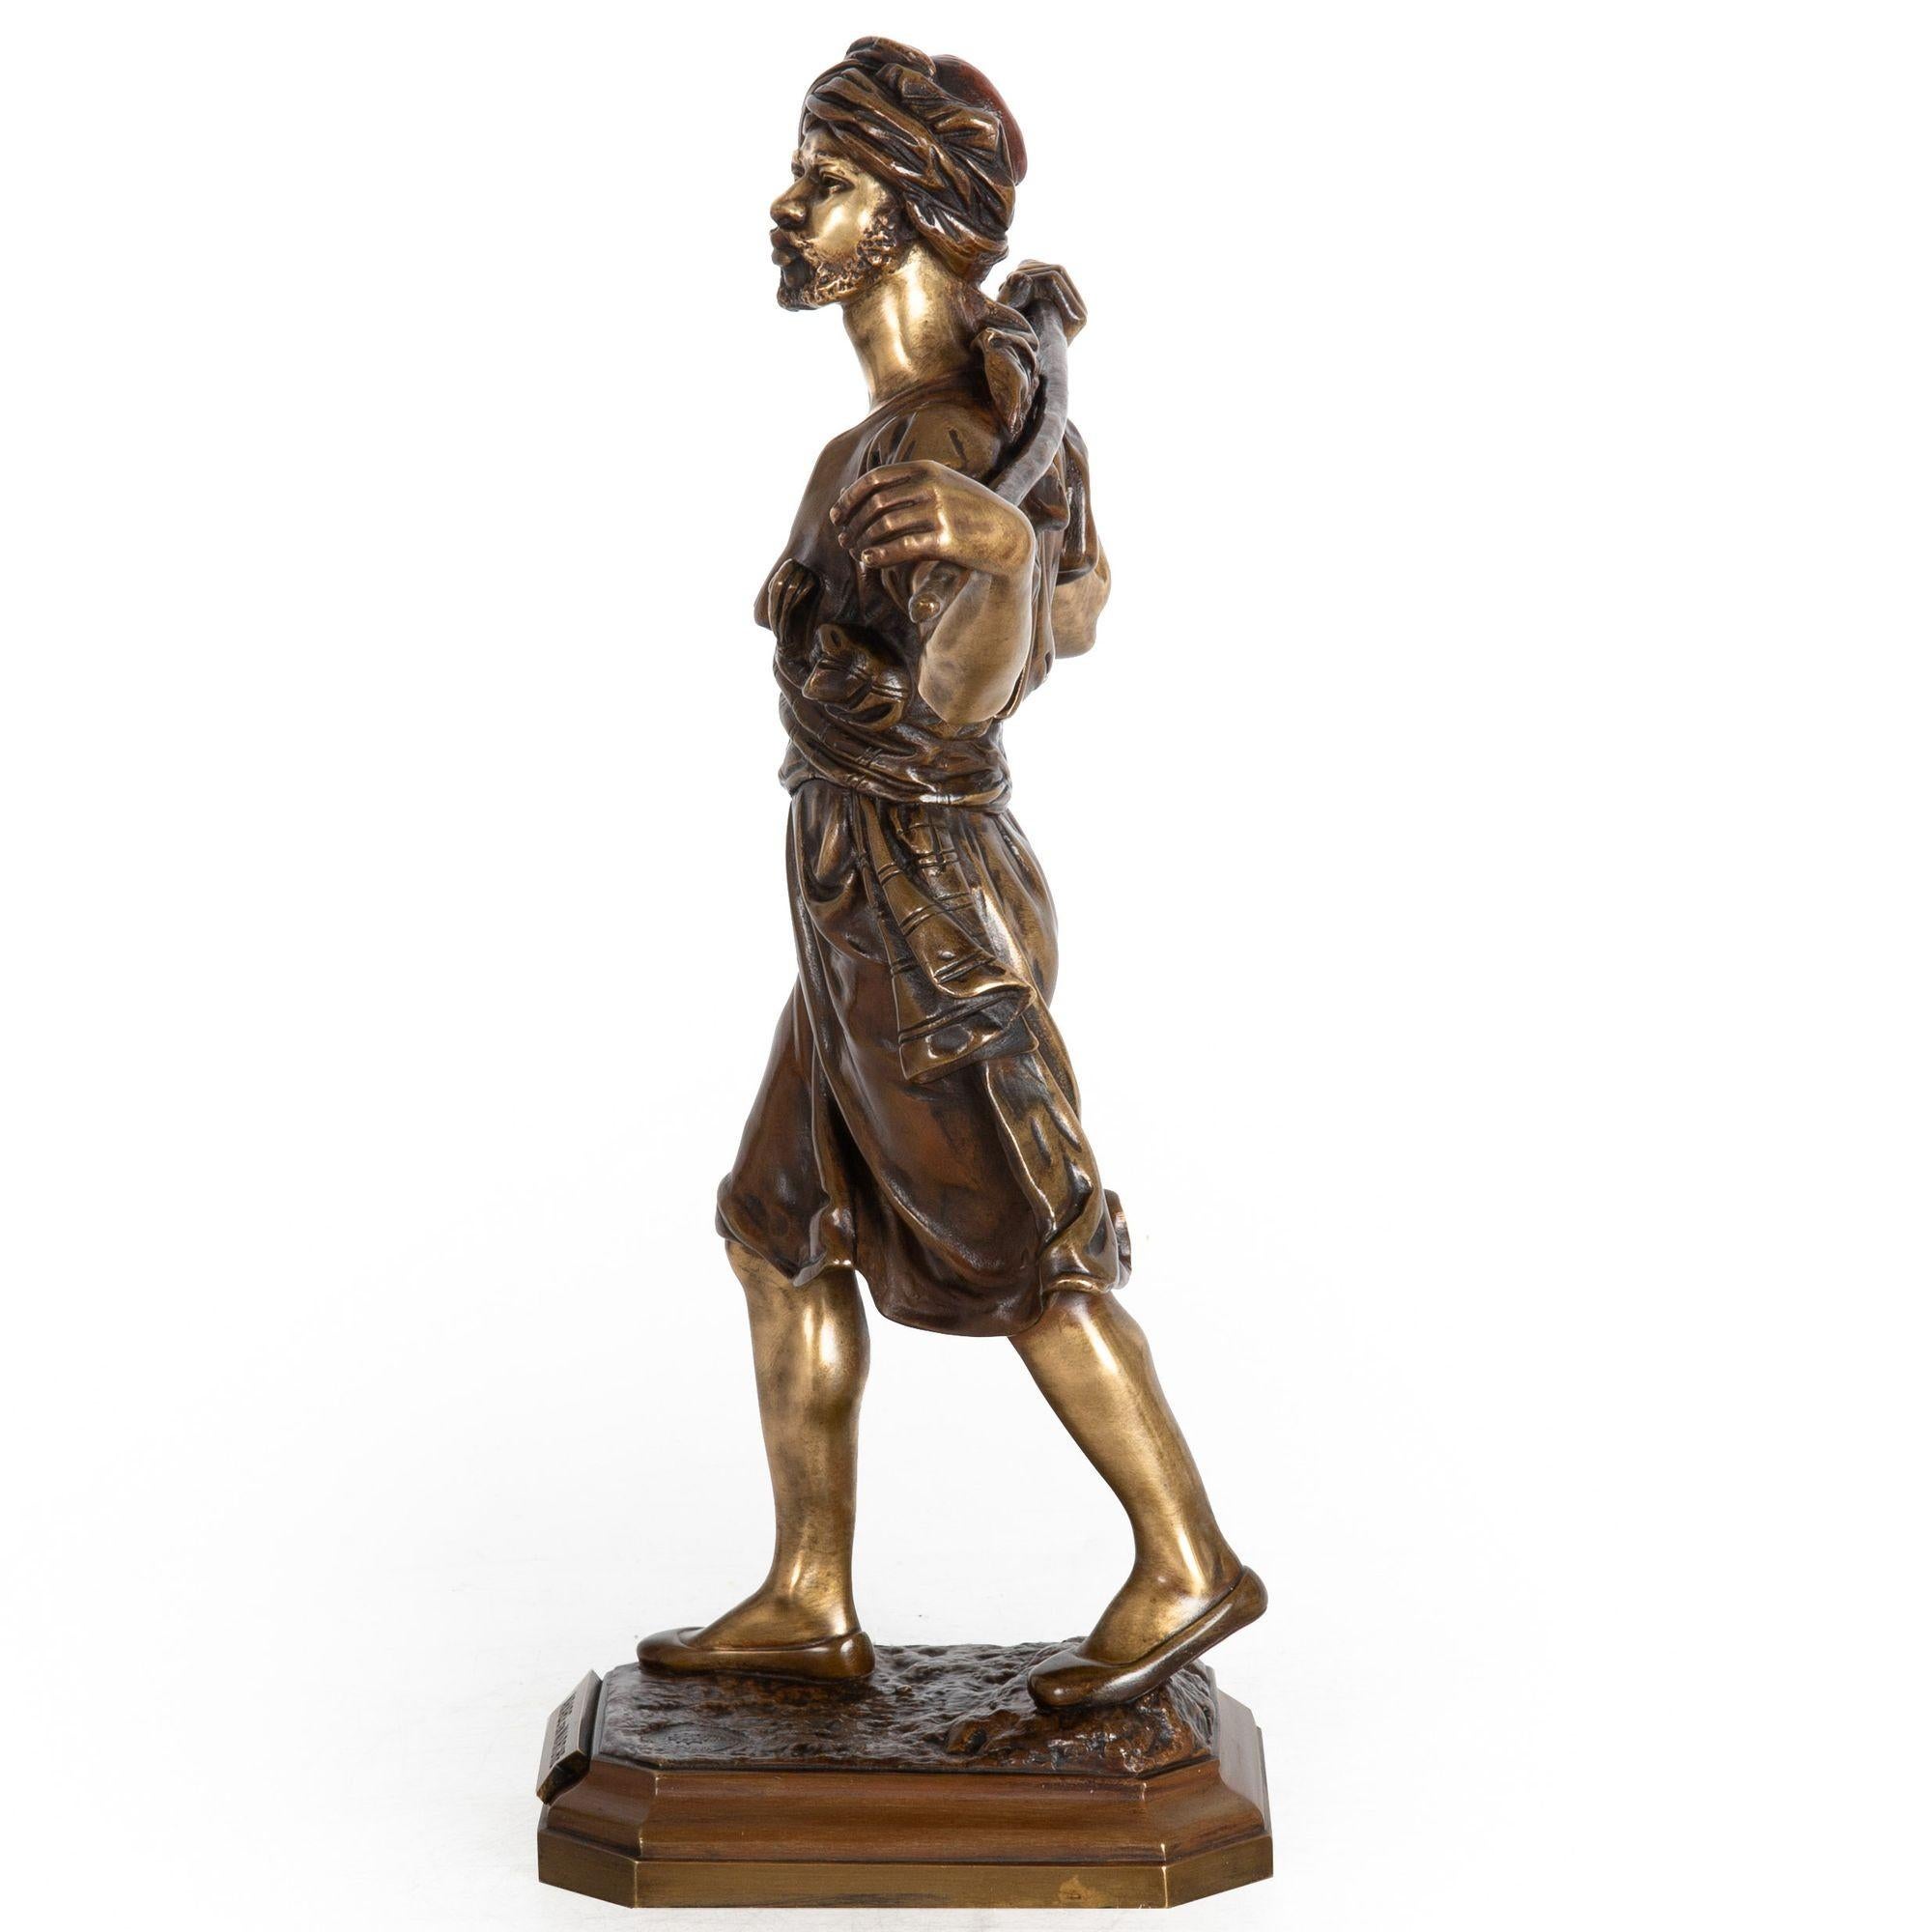 20th Century French Orientalist Bronze Sculpture of Arab Bedouin Man by Emile Pinedo For Sale